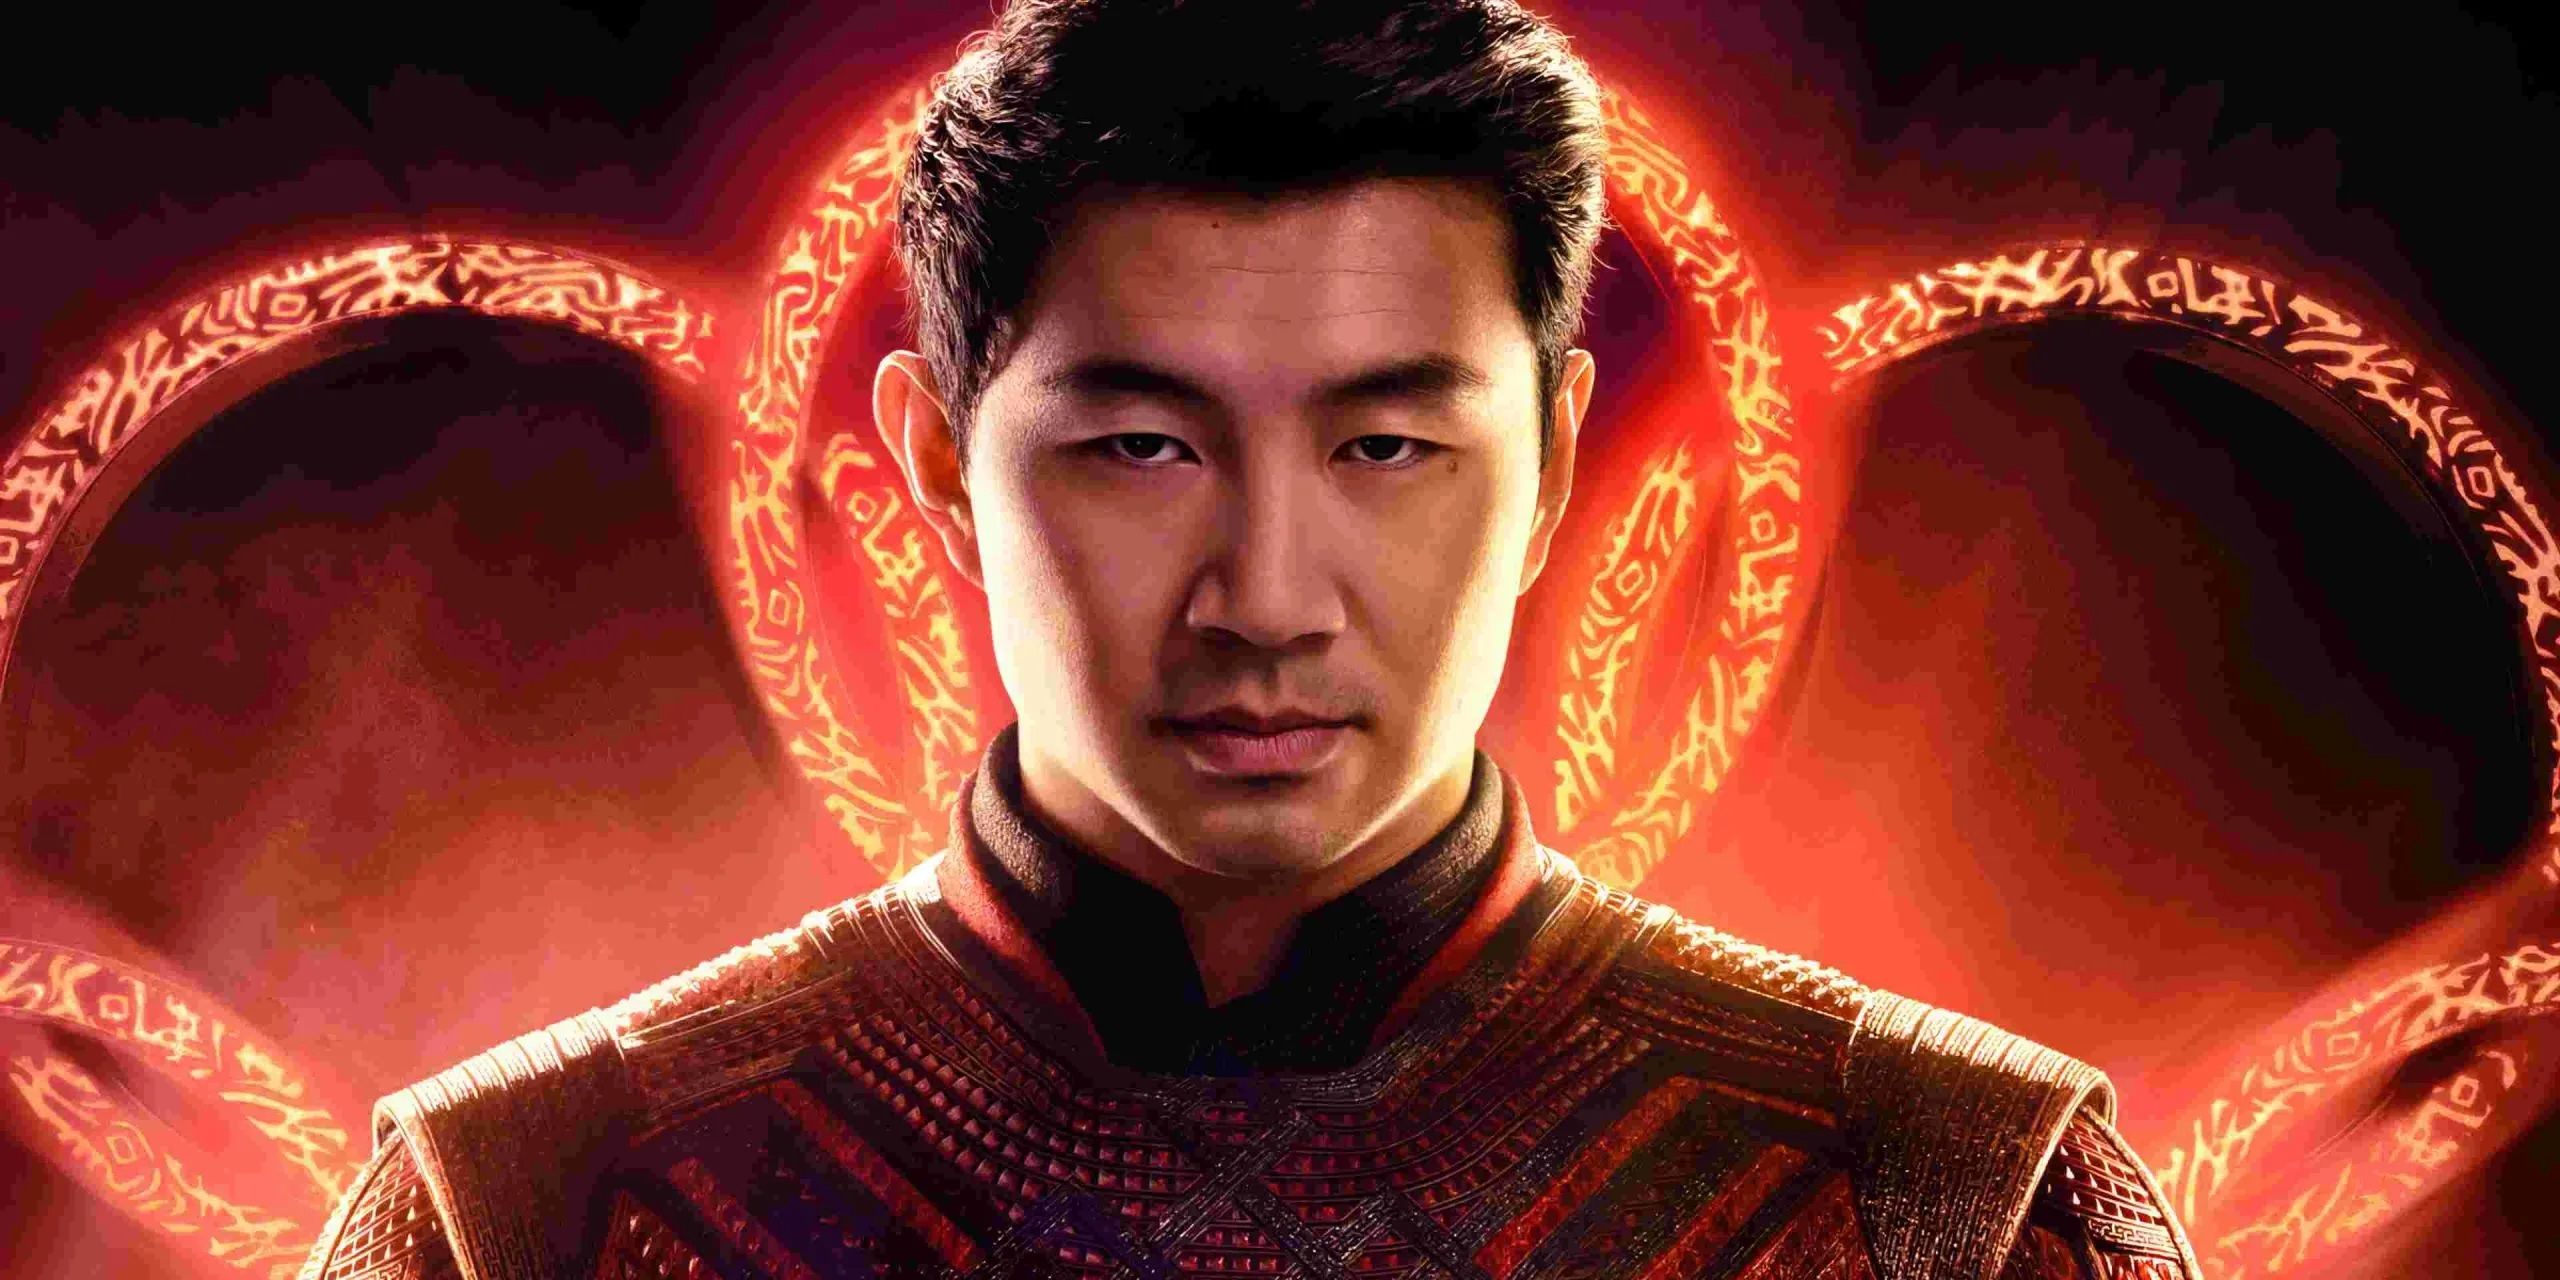 Simu Liu on the poster for Shang-Chi and the Legend of the Ten Rings